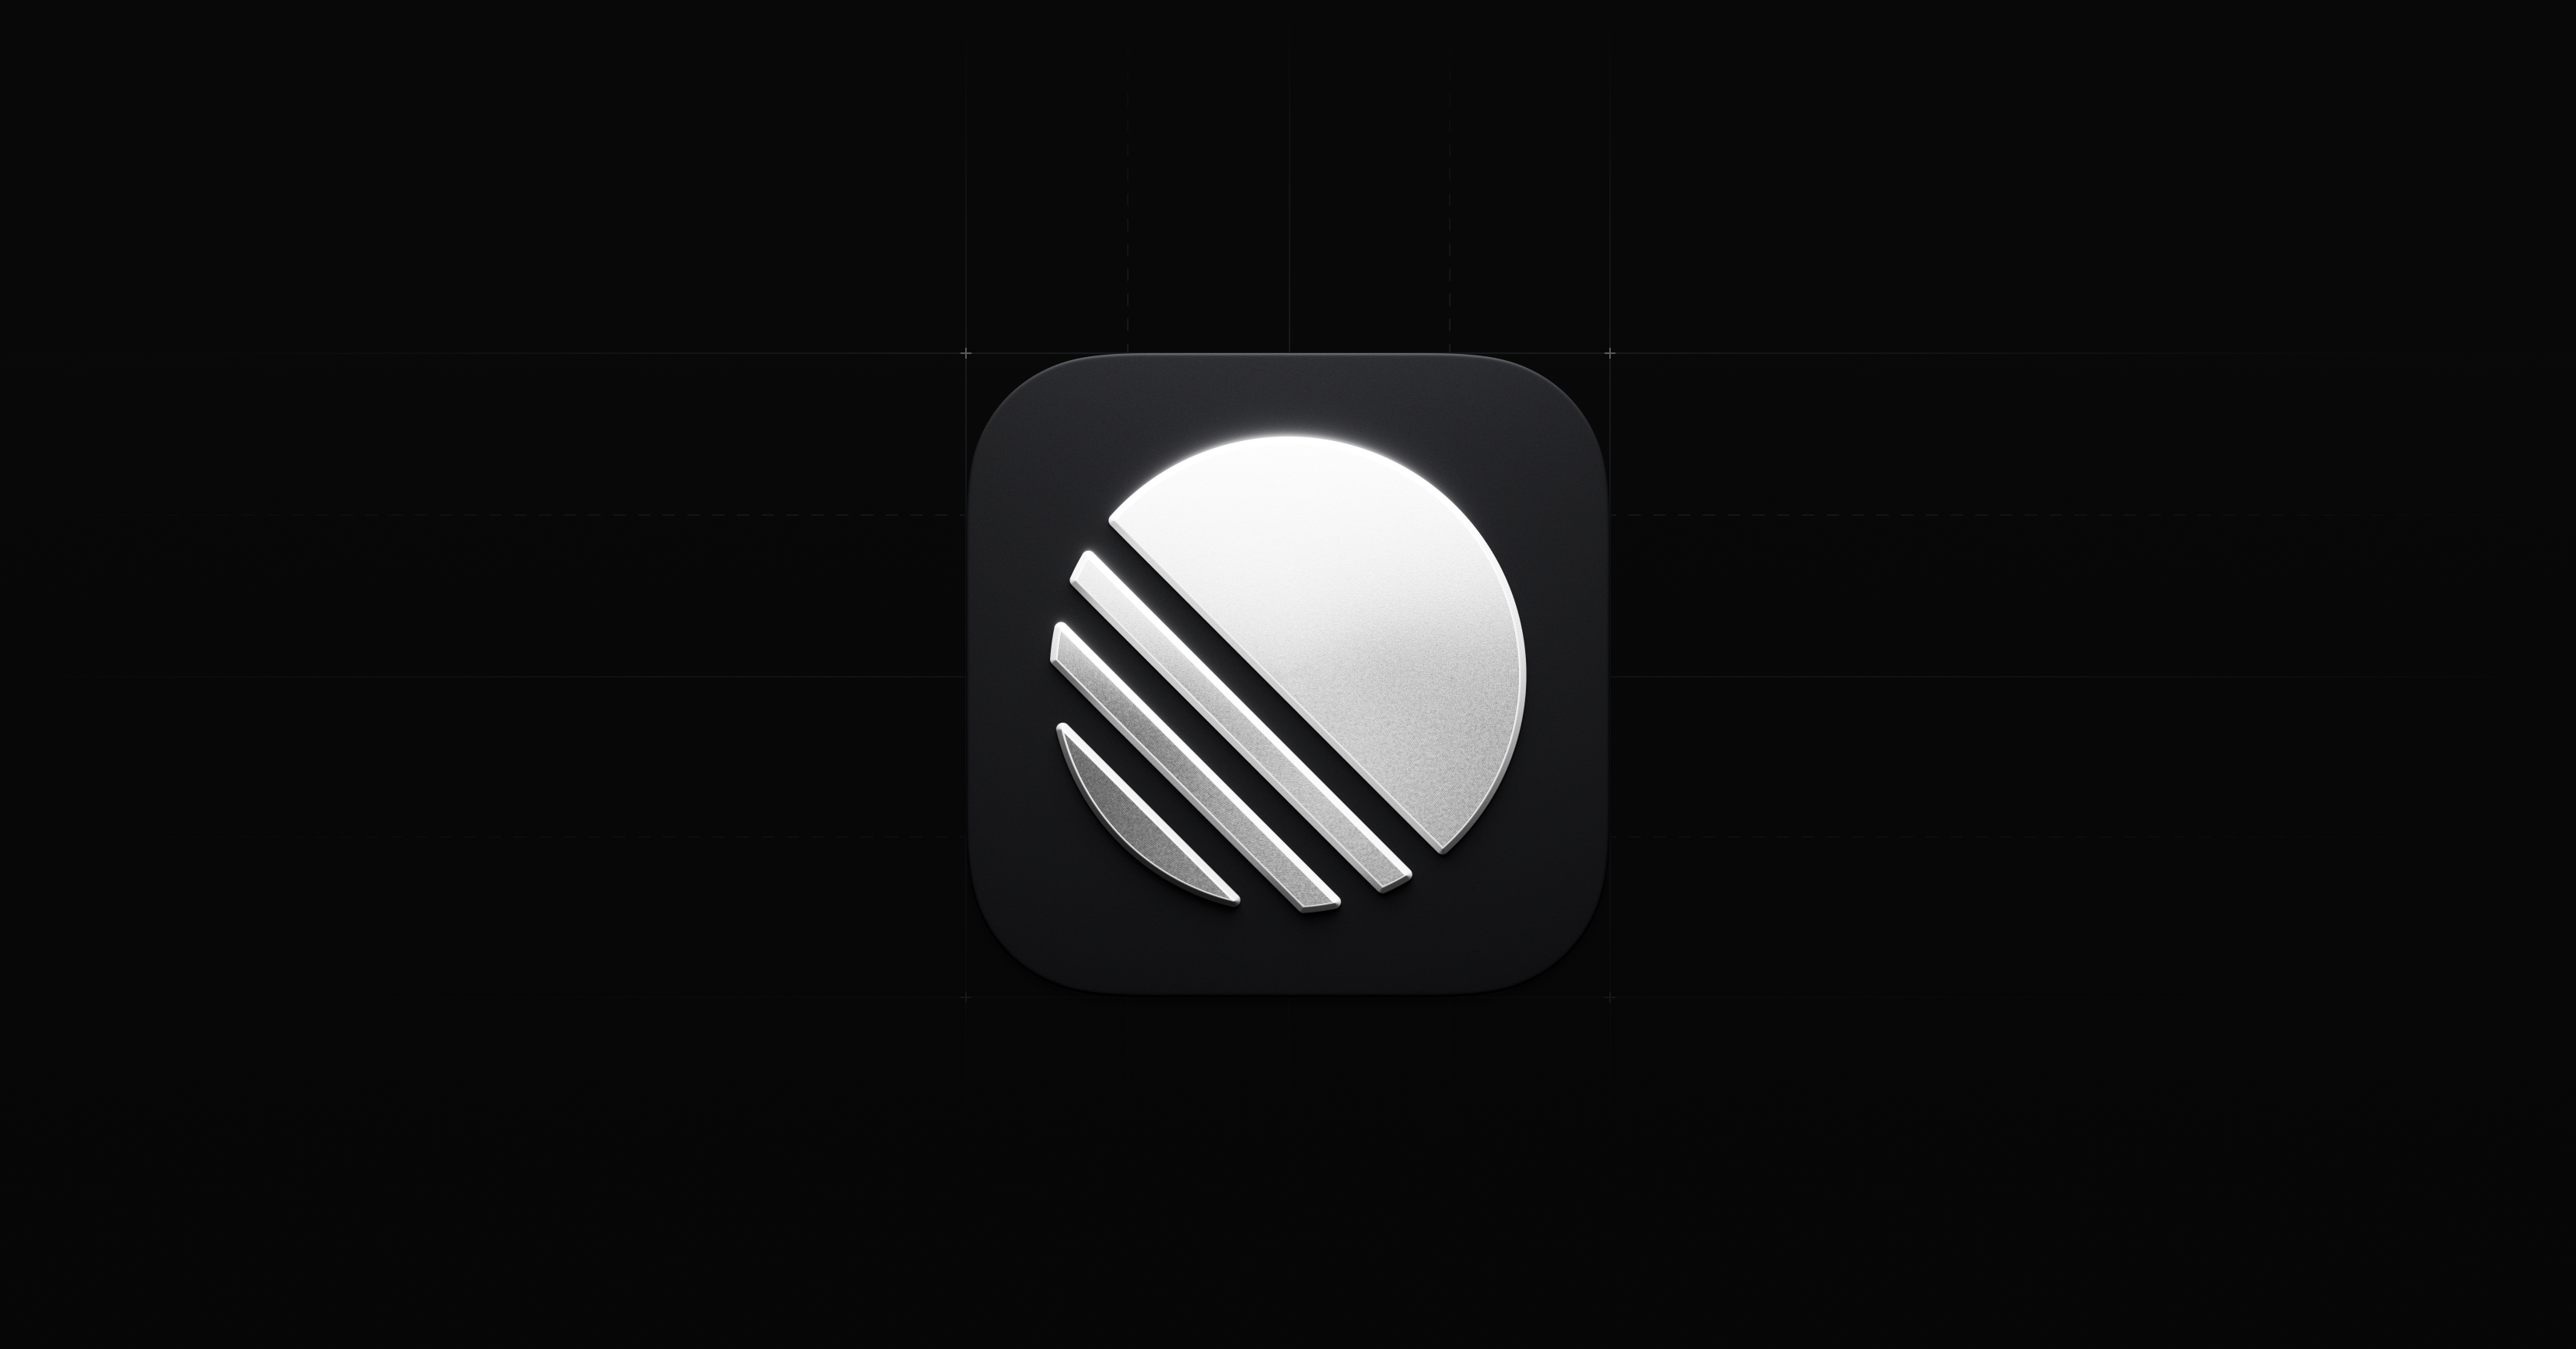 Our new macOS app icon